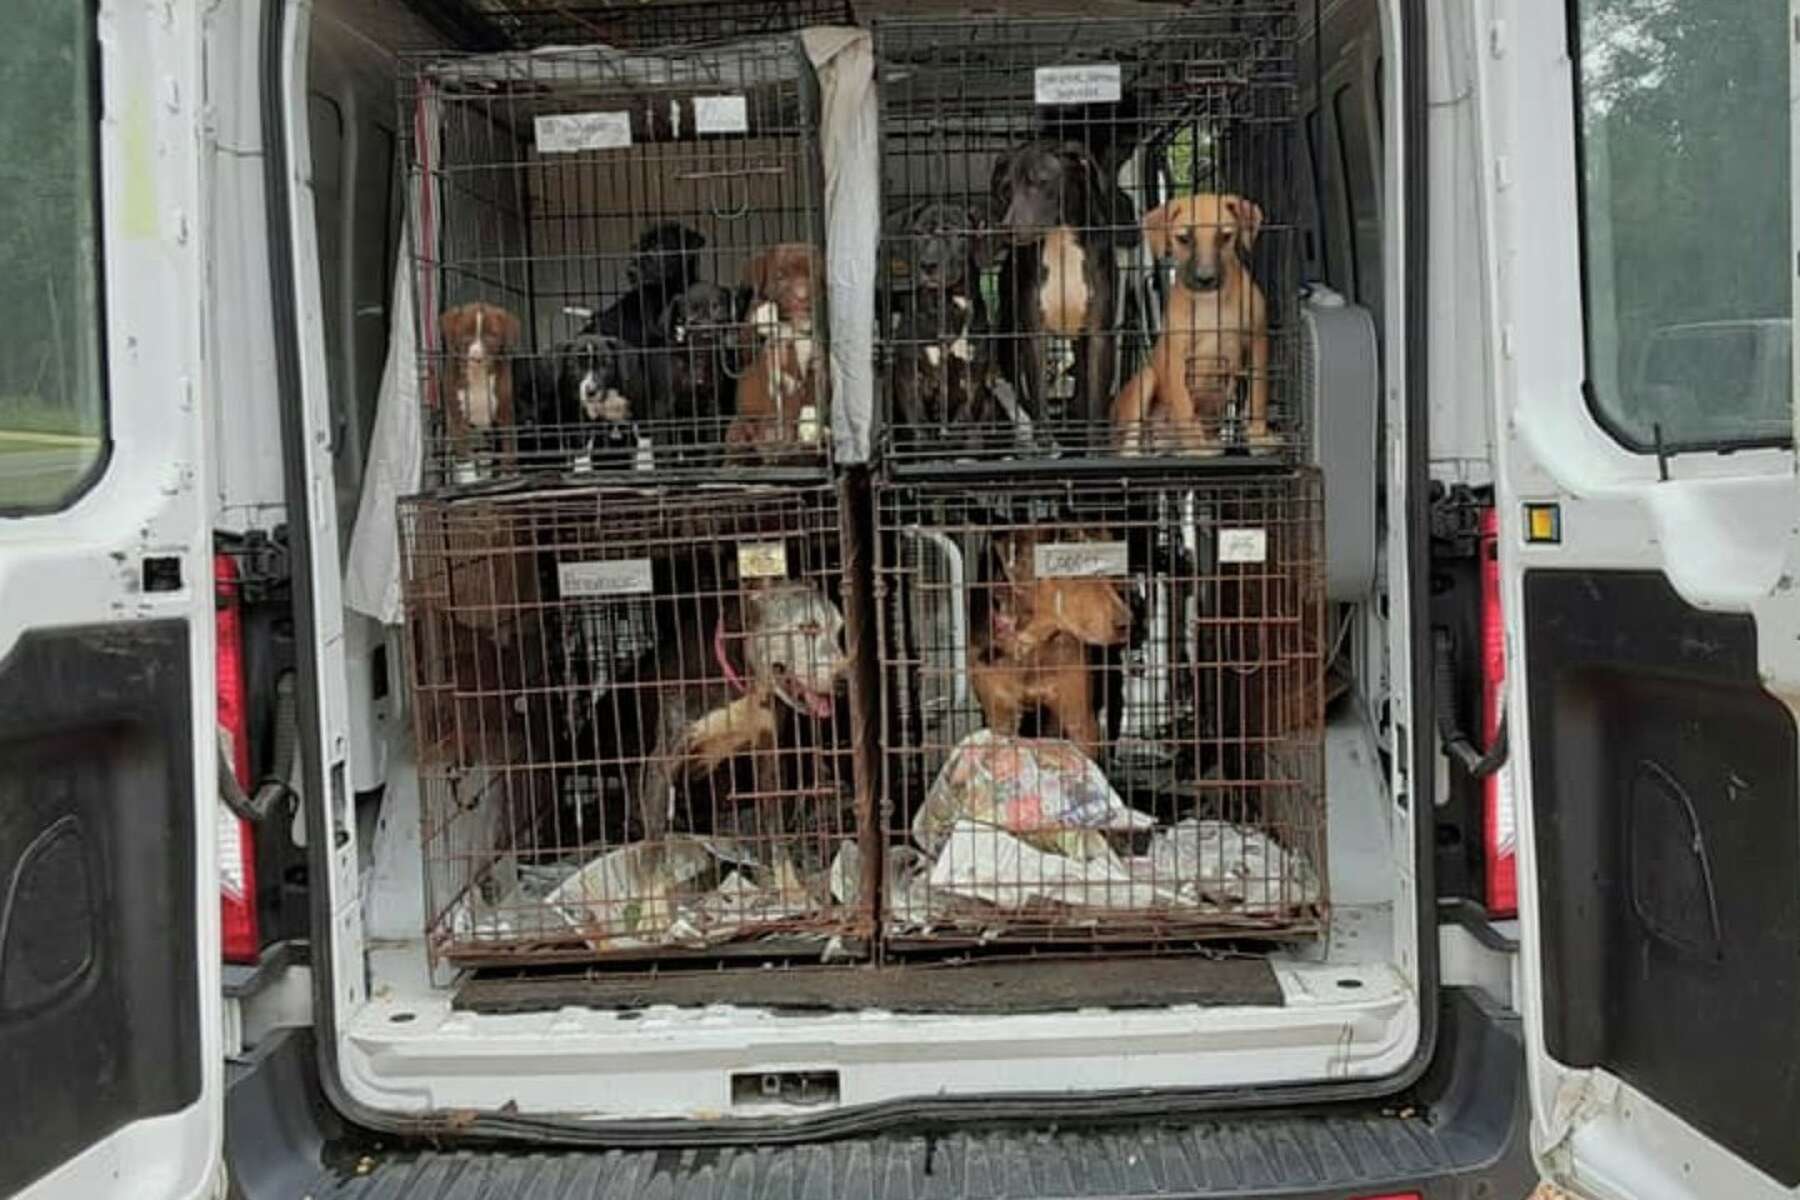 Shelter animals evacuated from Hurricane Ida land in Hudson Valley